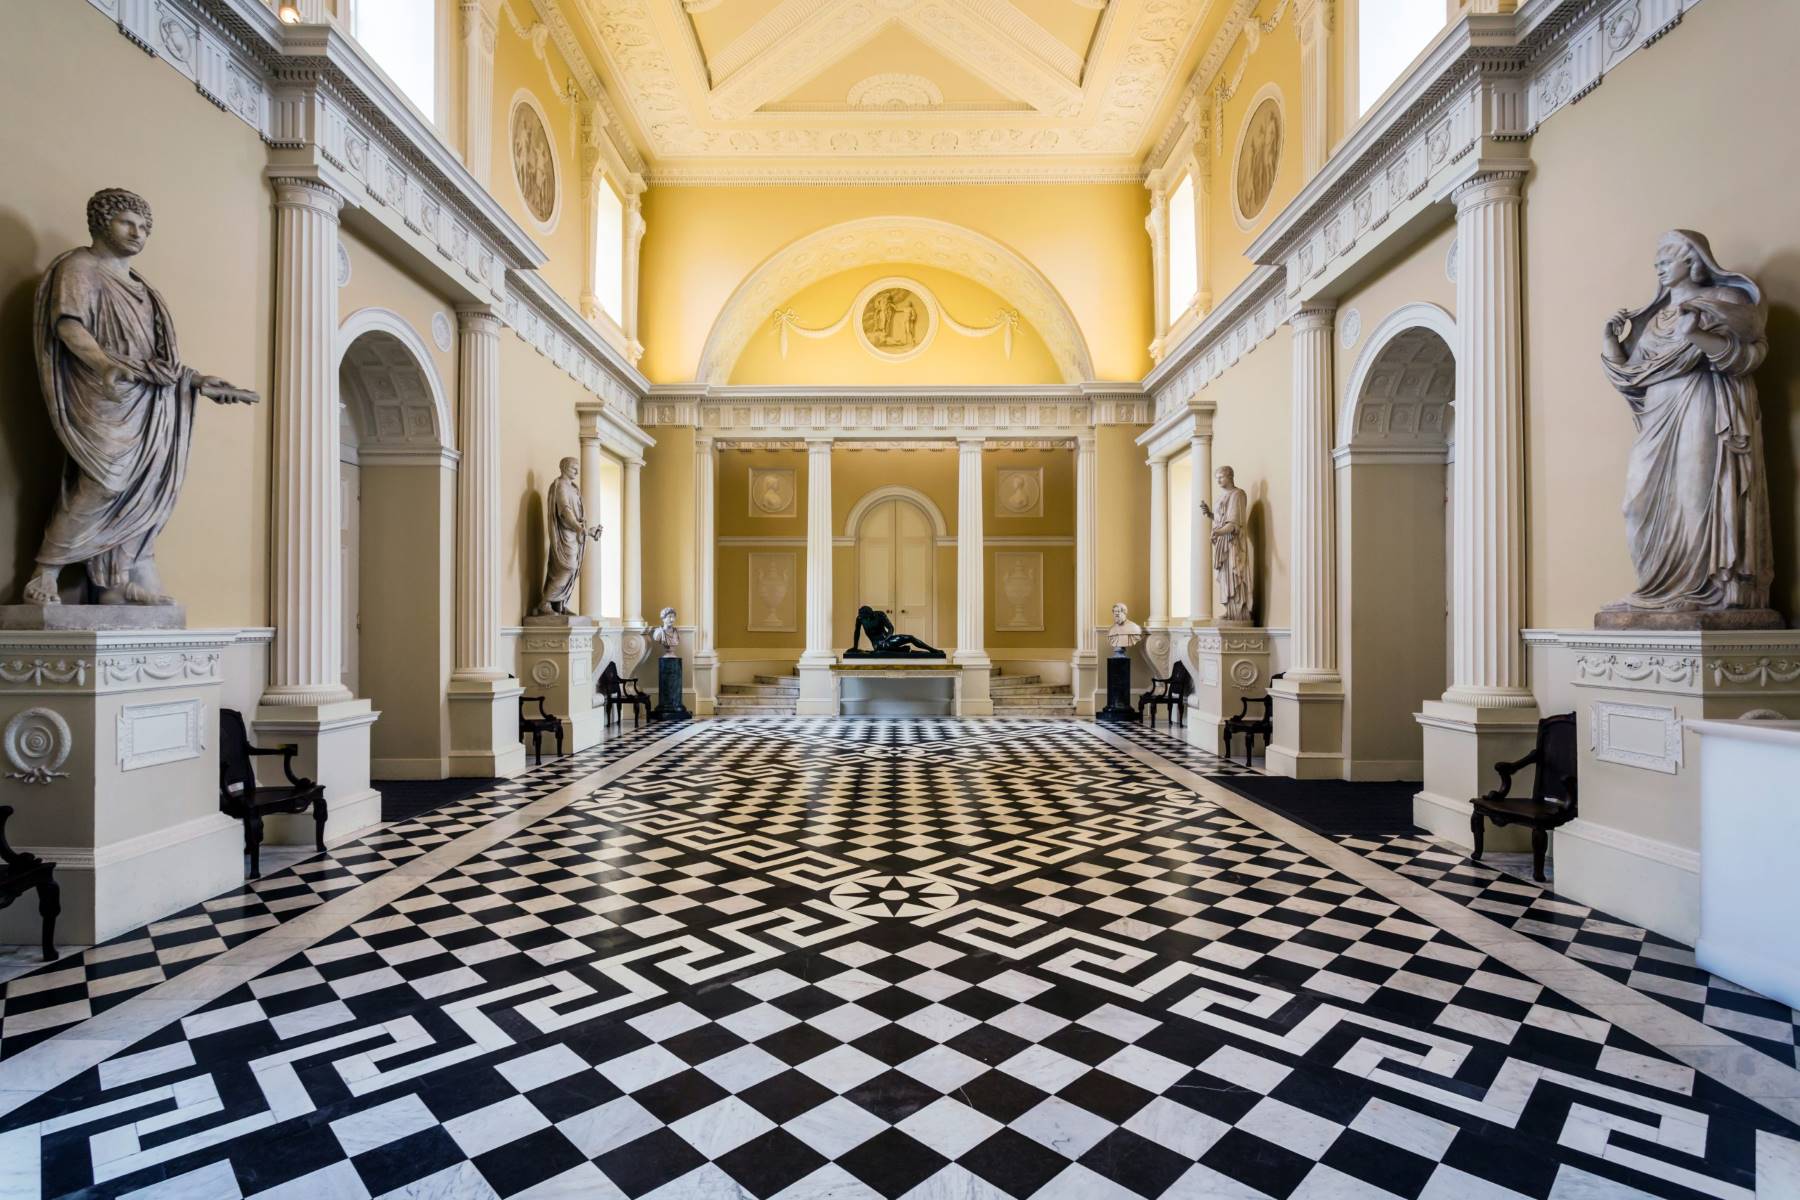 What Is The Design Of Robert Adams’ Syon House Based Upon?